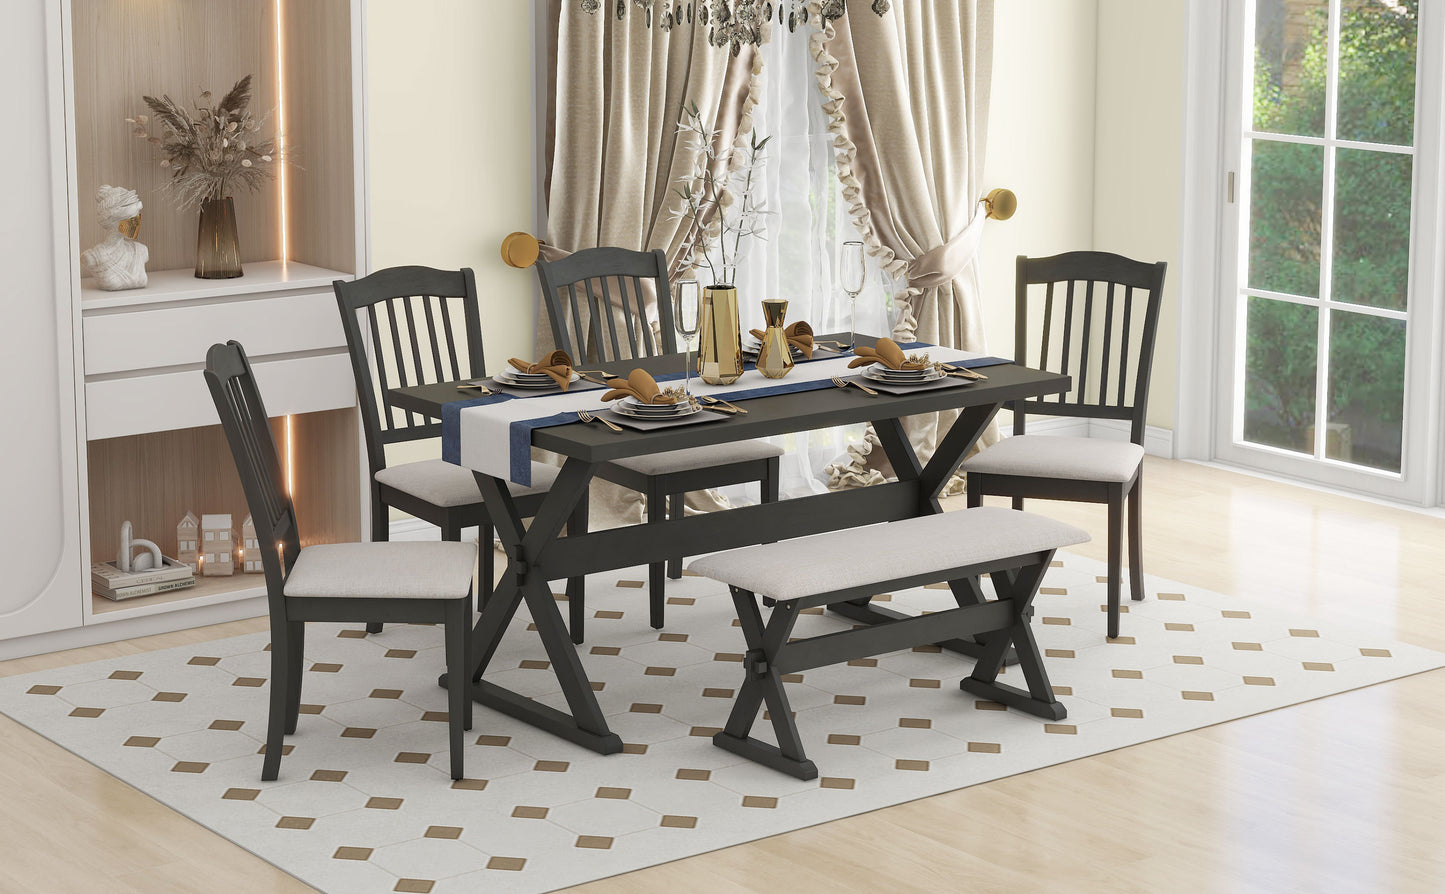 6-Piece Rustic Dining Set, Rectangular X-Frame Table and 4 Upholstered Chairs & Bench  (Gray)